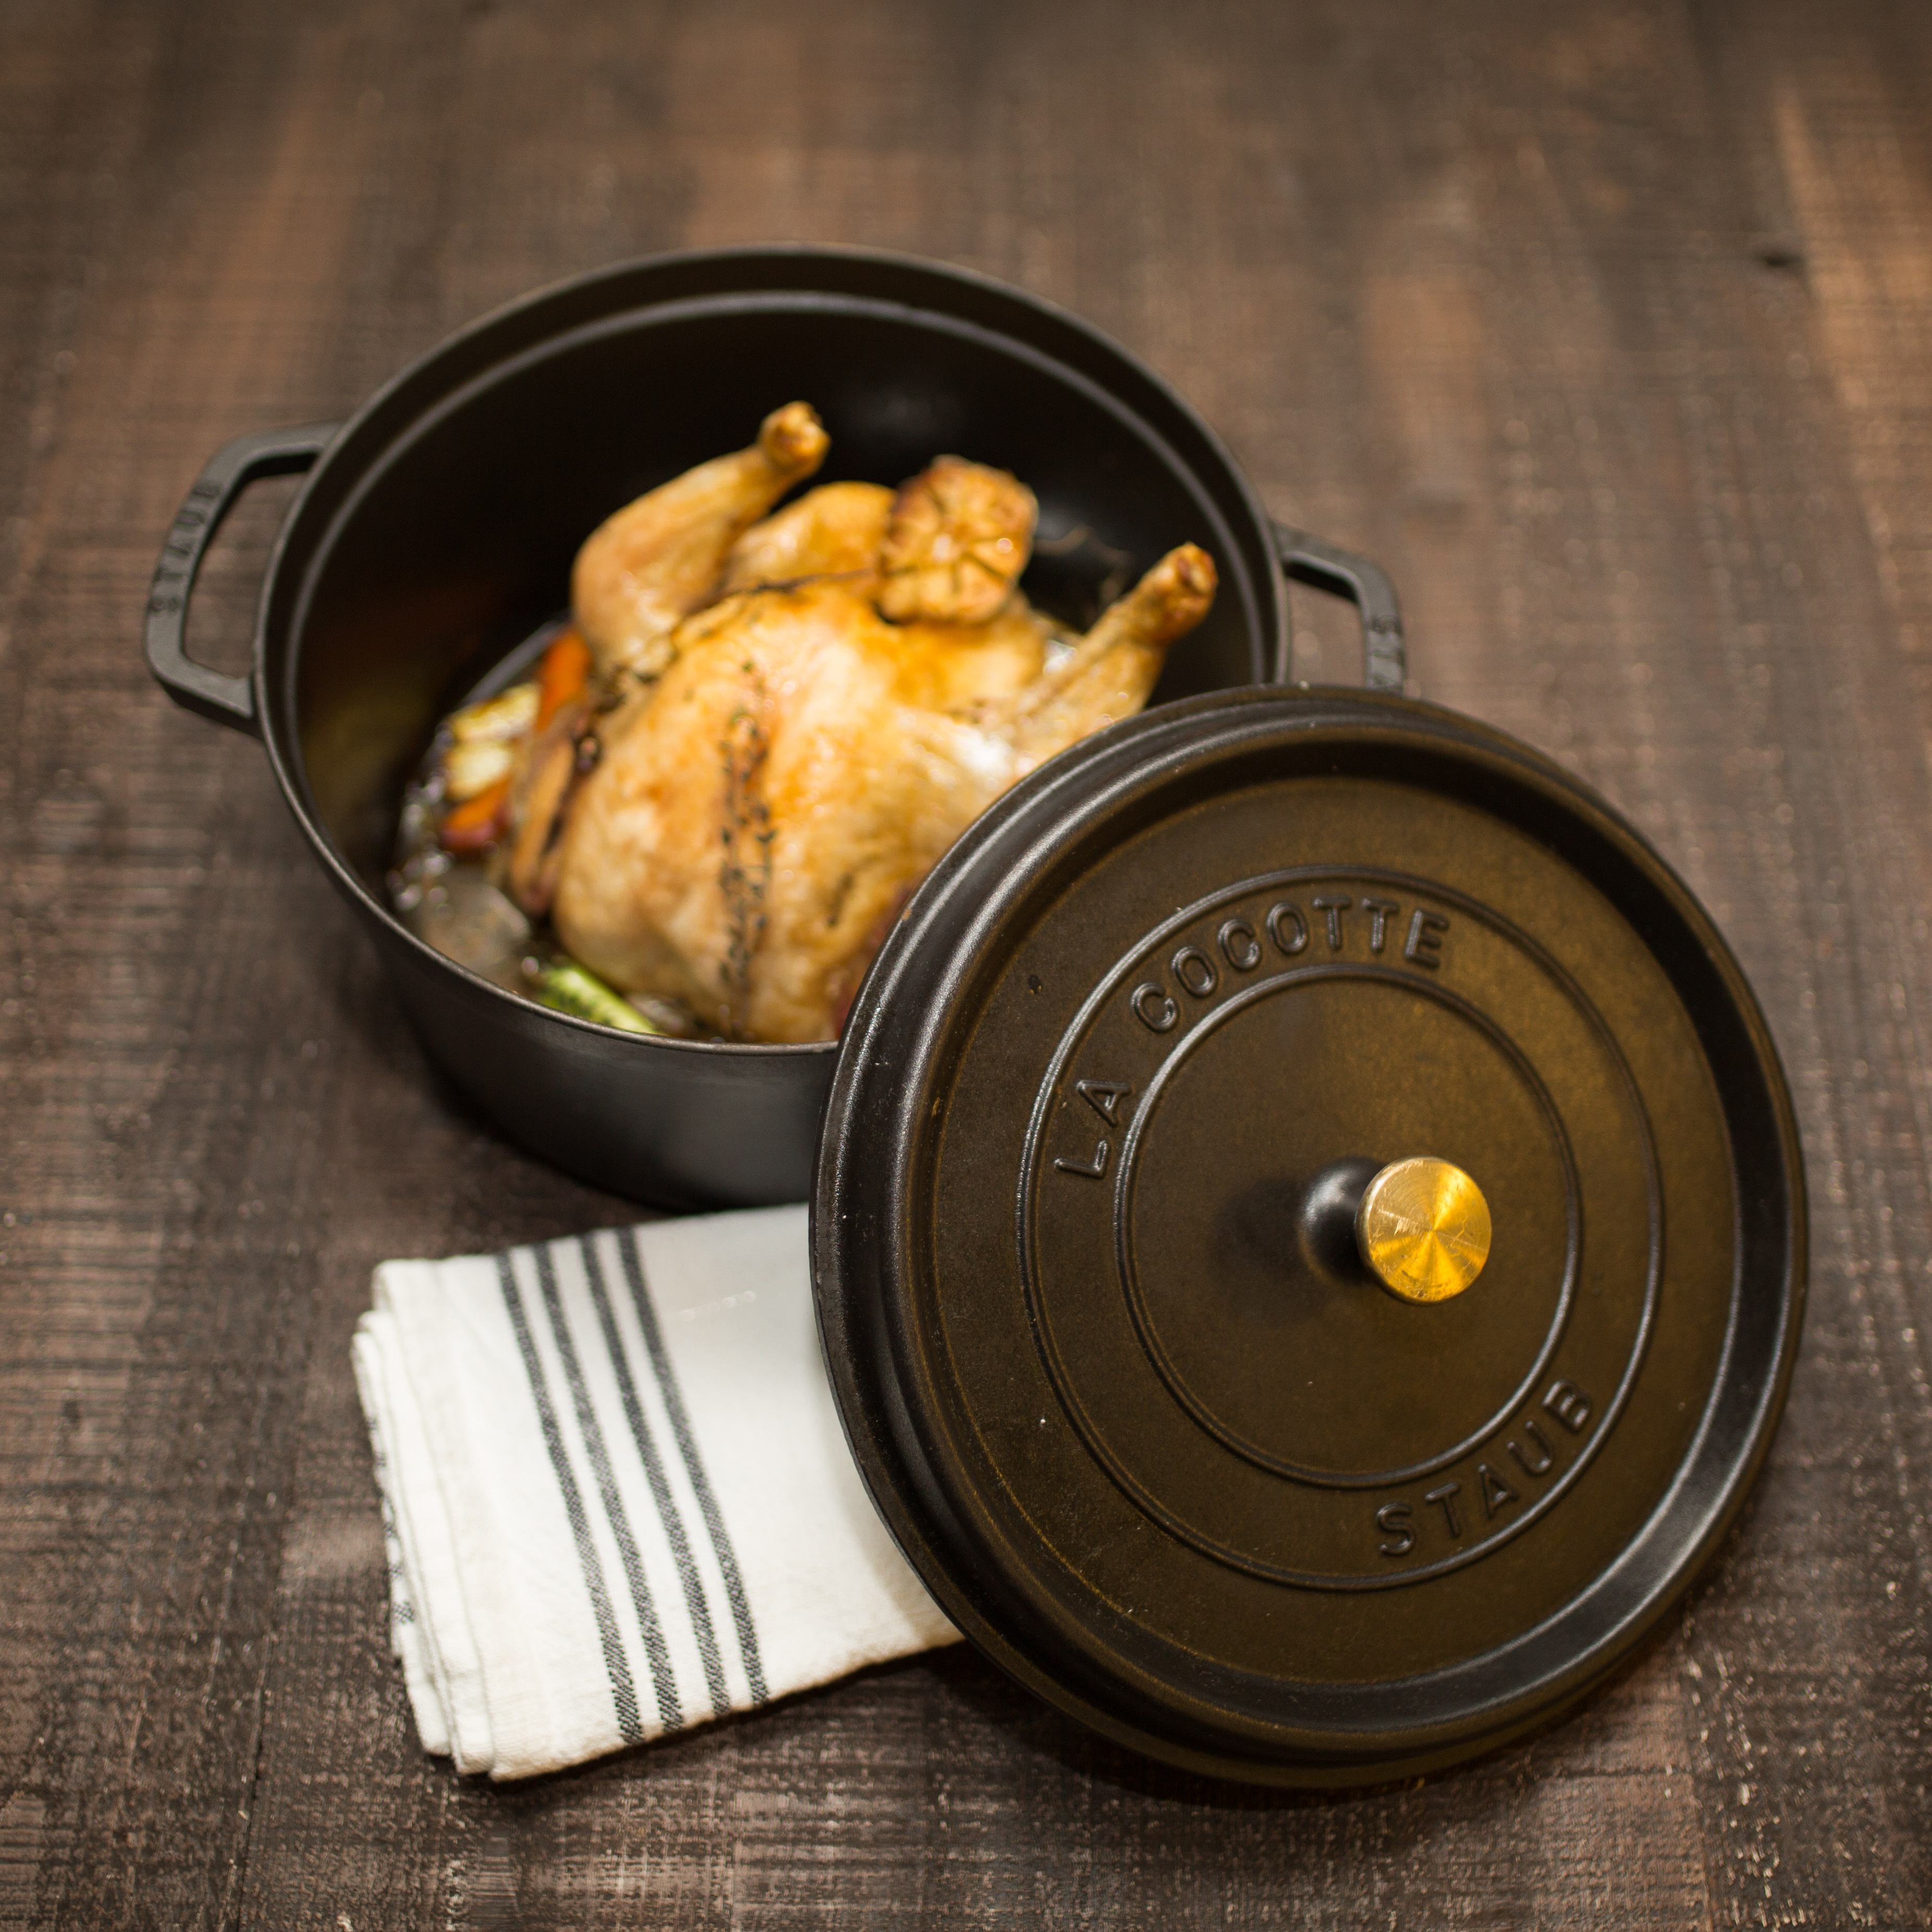 A turkey sits in a black Staub dutch oven on a wooden table